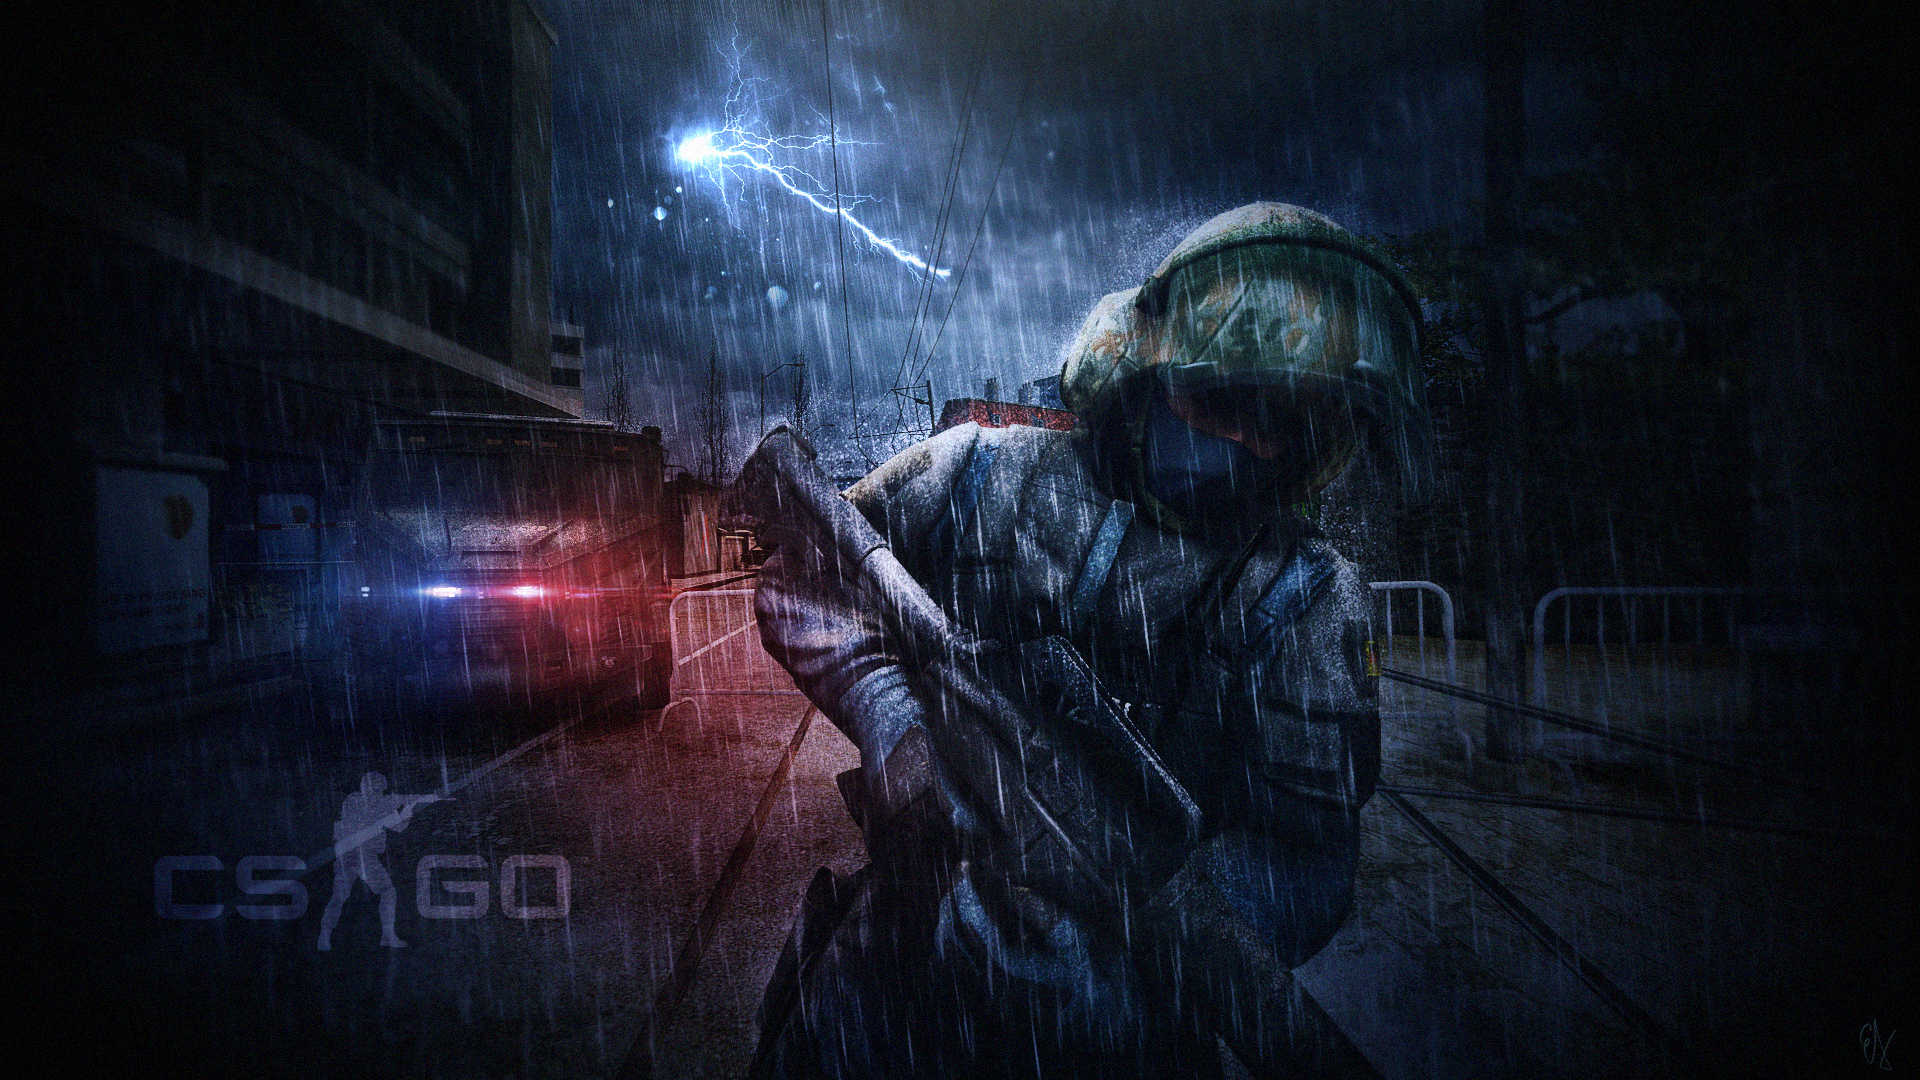 Video Game Counter-Strike: Global Offensive HD Wallpaper | Background Image